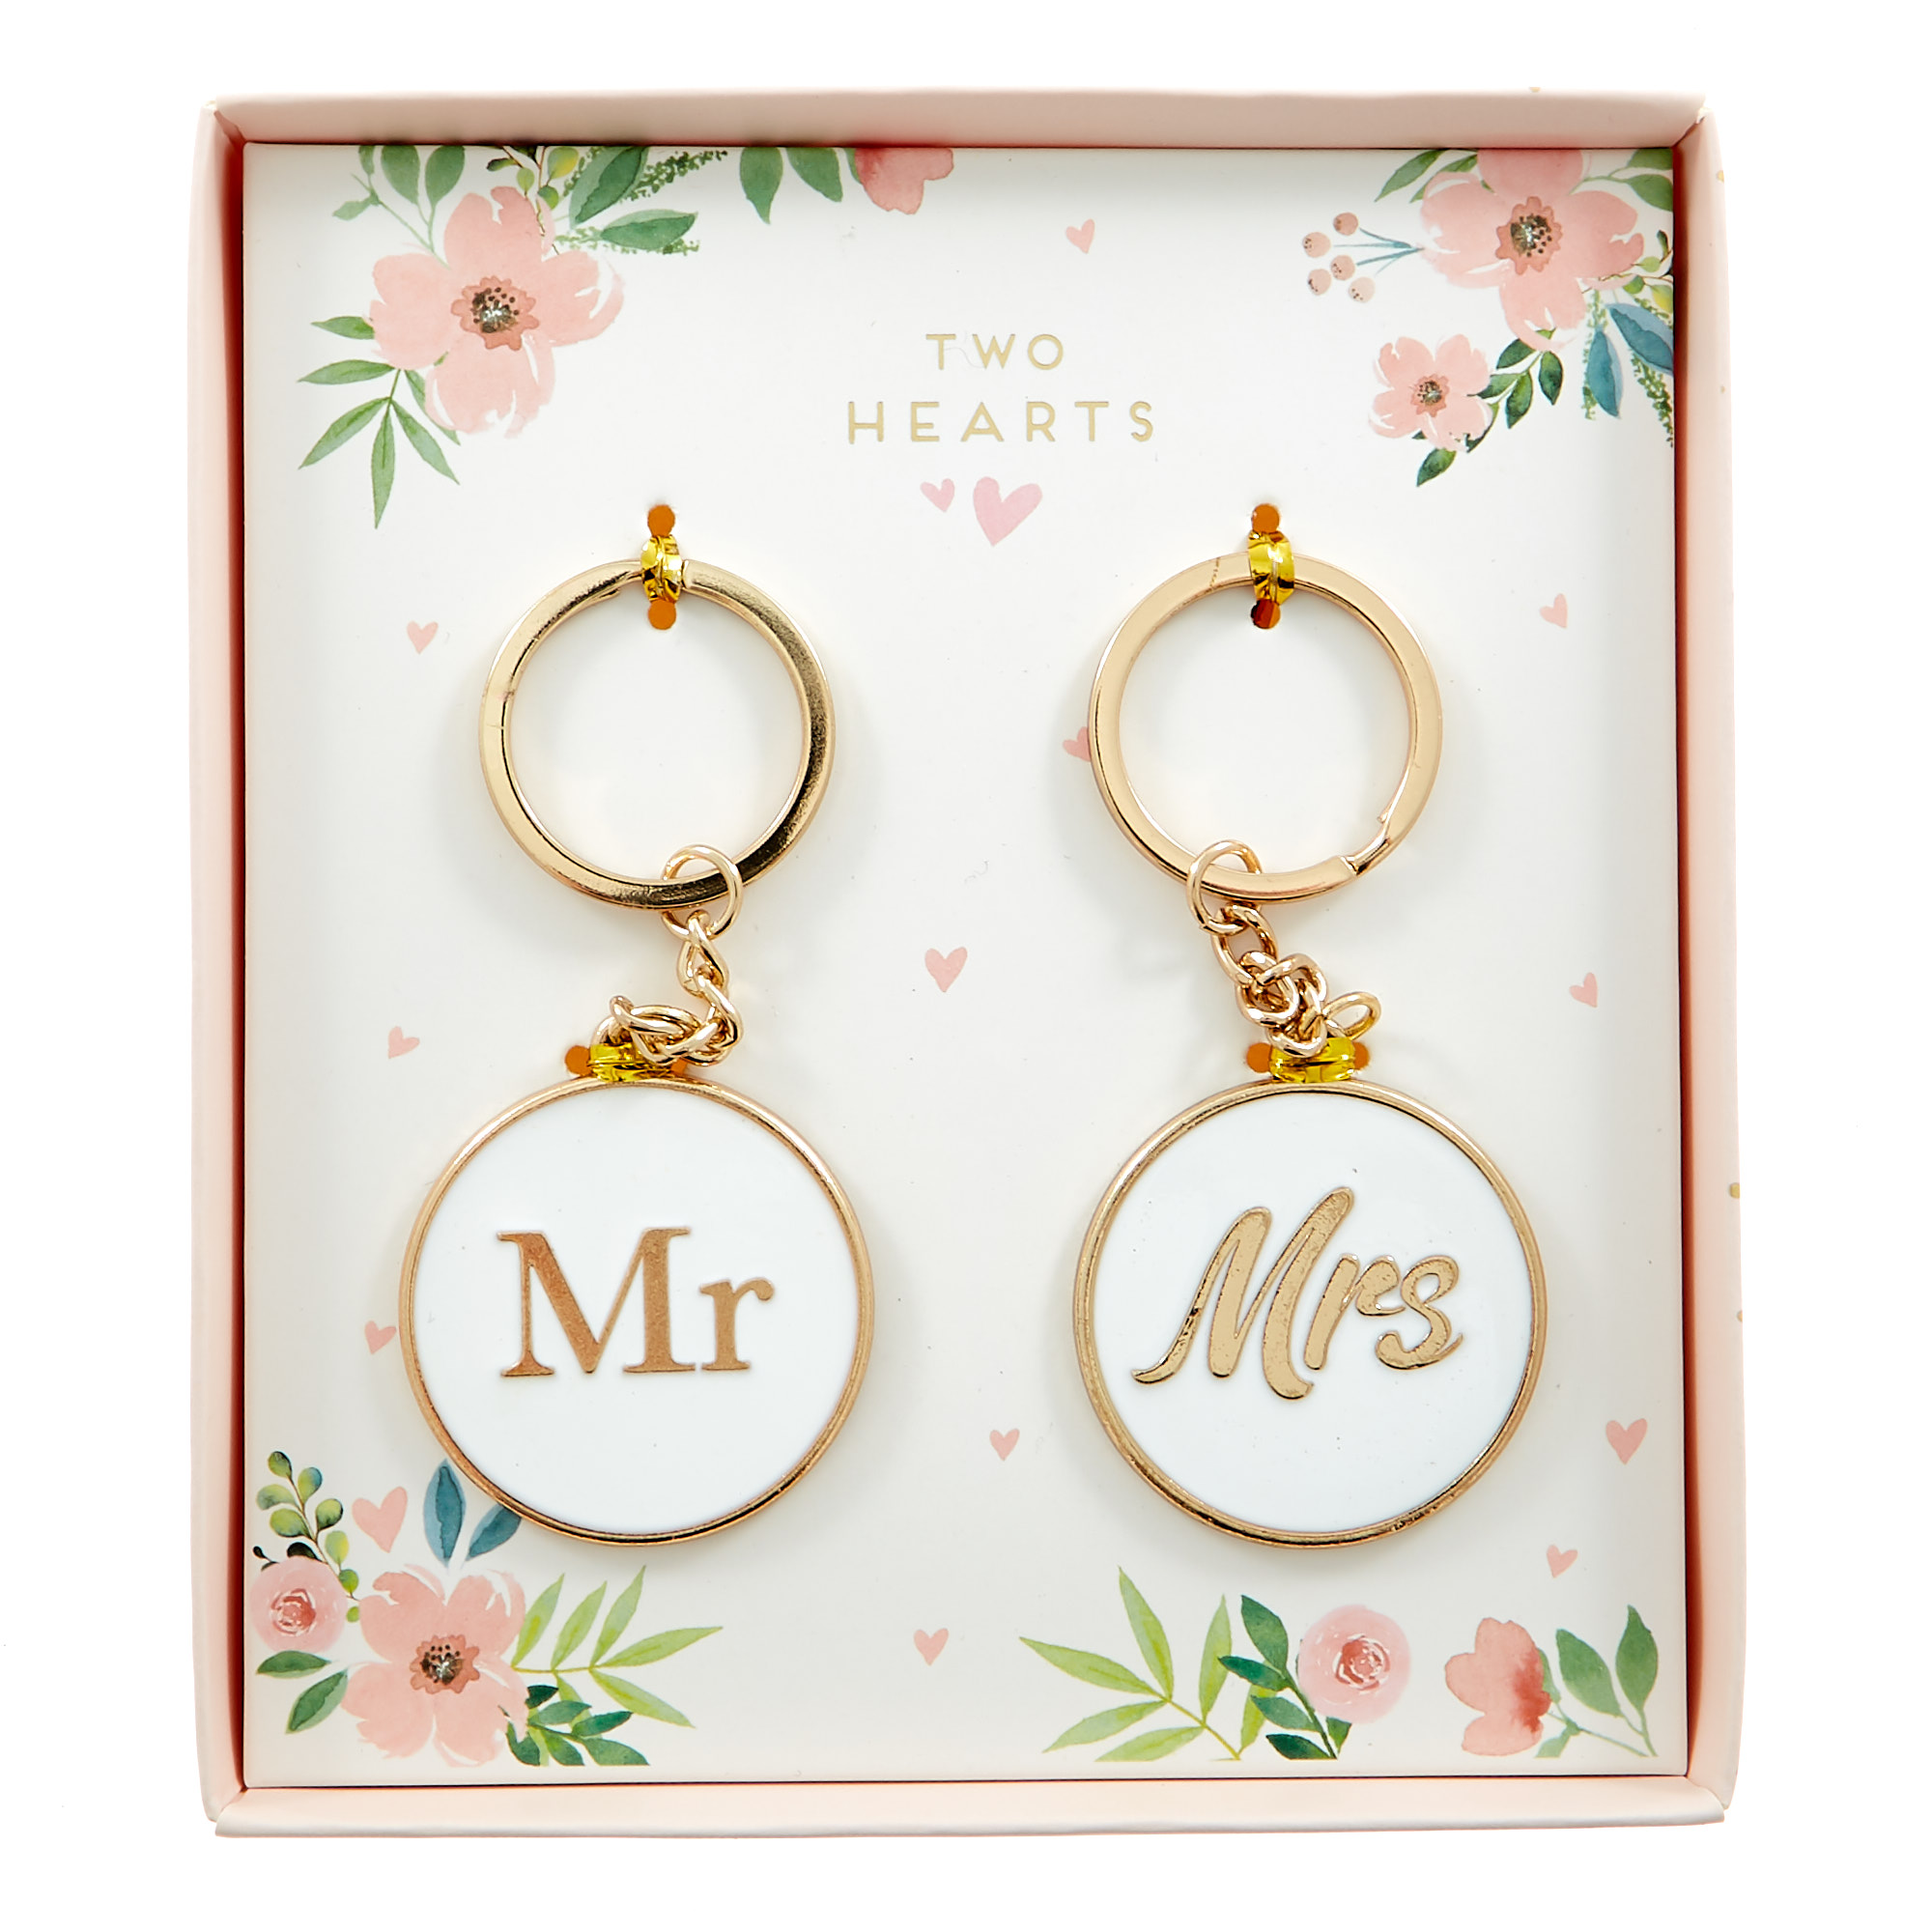 Two Hearts Mr Mrs Keyring